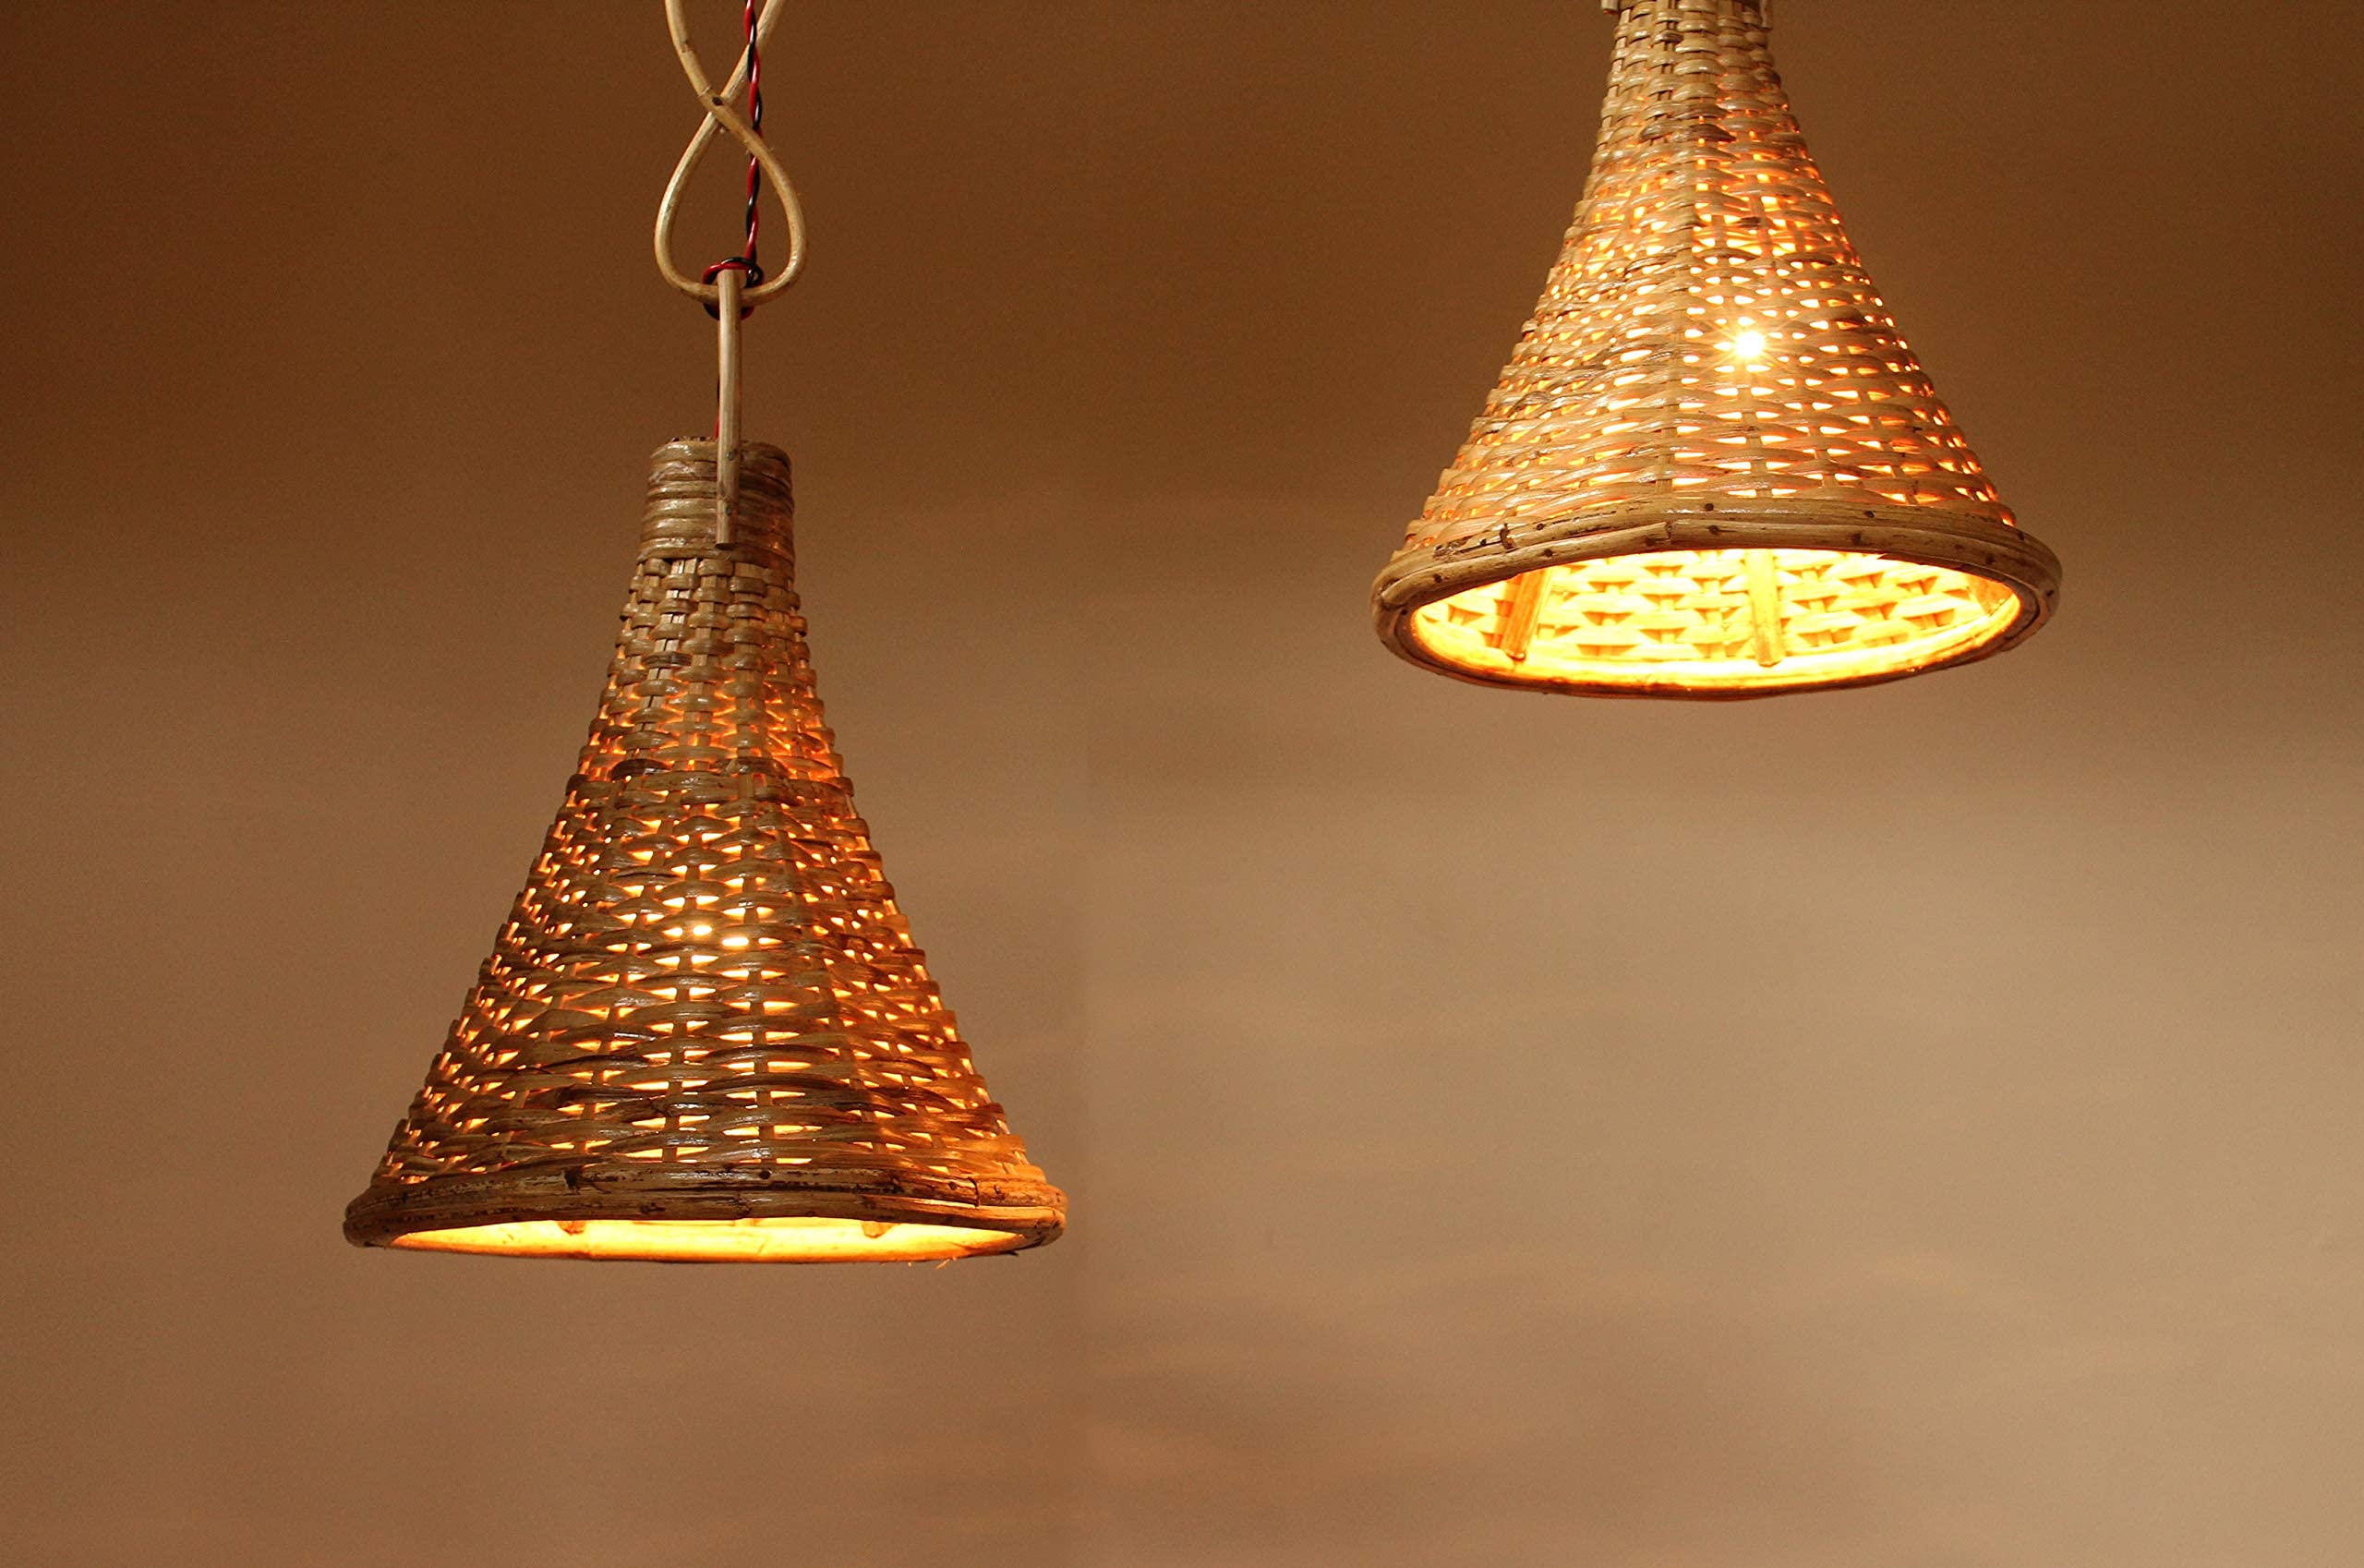 Perfection of the Unique Qualities of Cane Lamp Shades